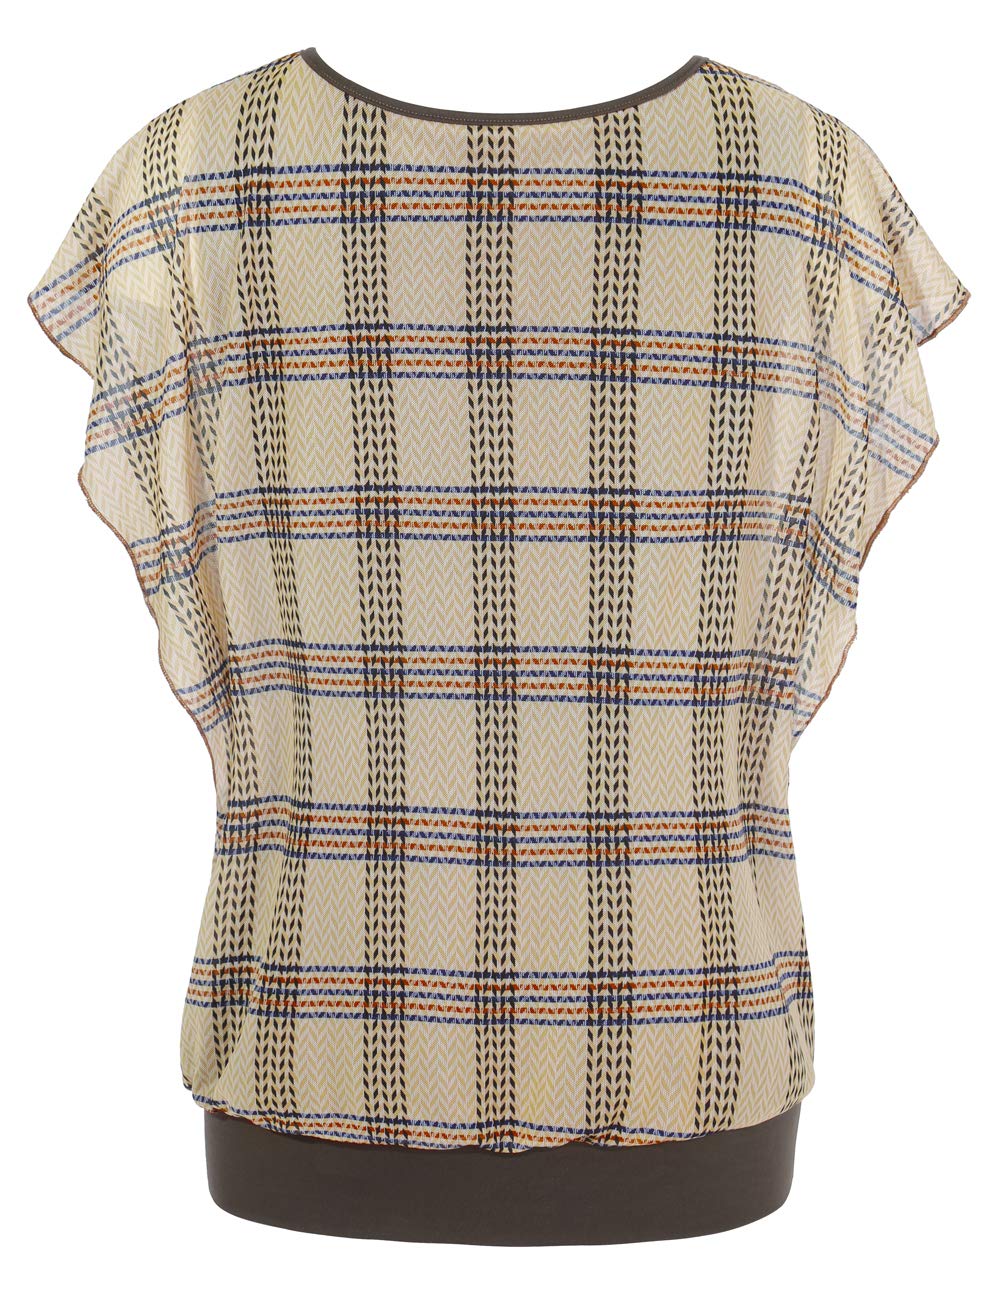 BAISHENGGT Apricot Plaid Women's Printed Flouncing Flared Short Sleeve Mesh Blouse Tops